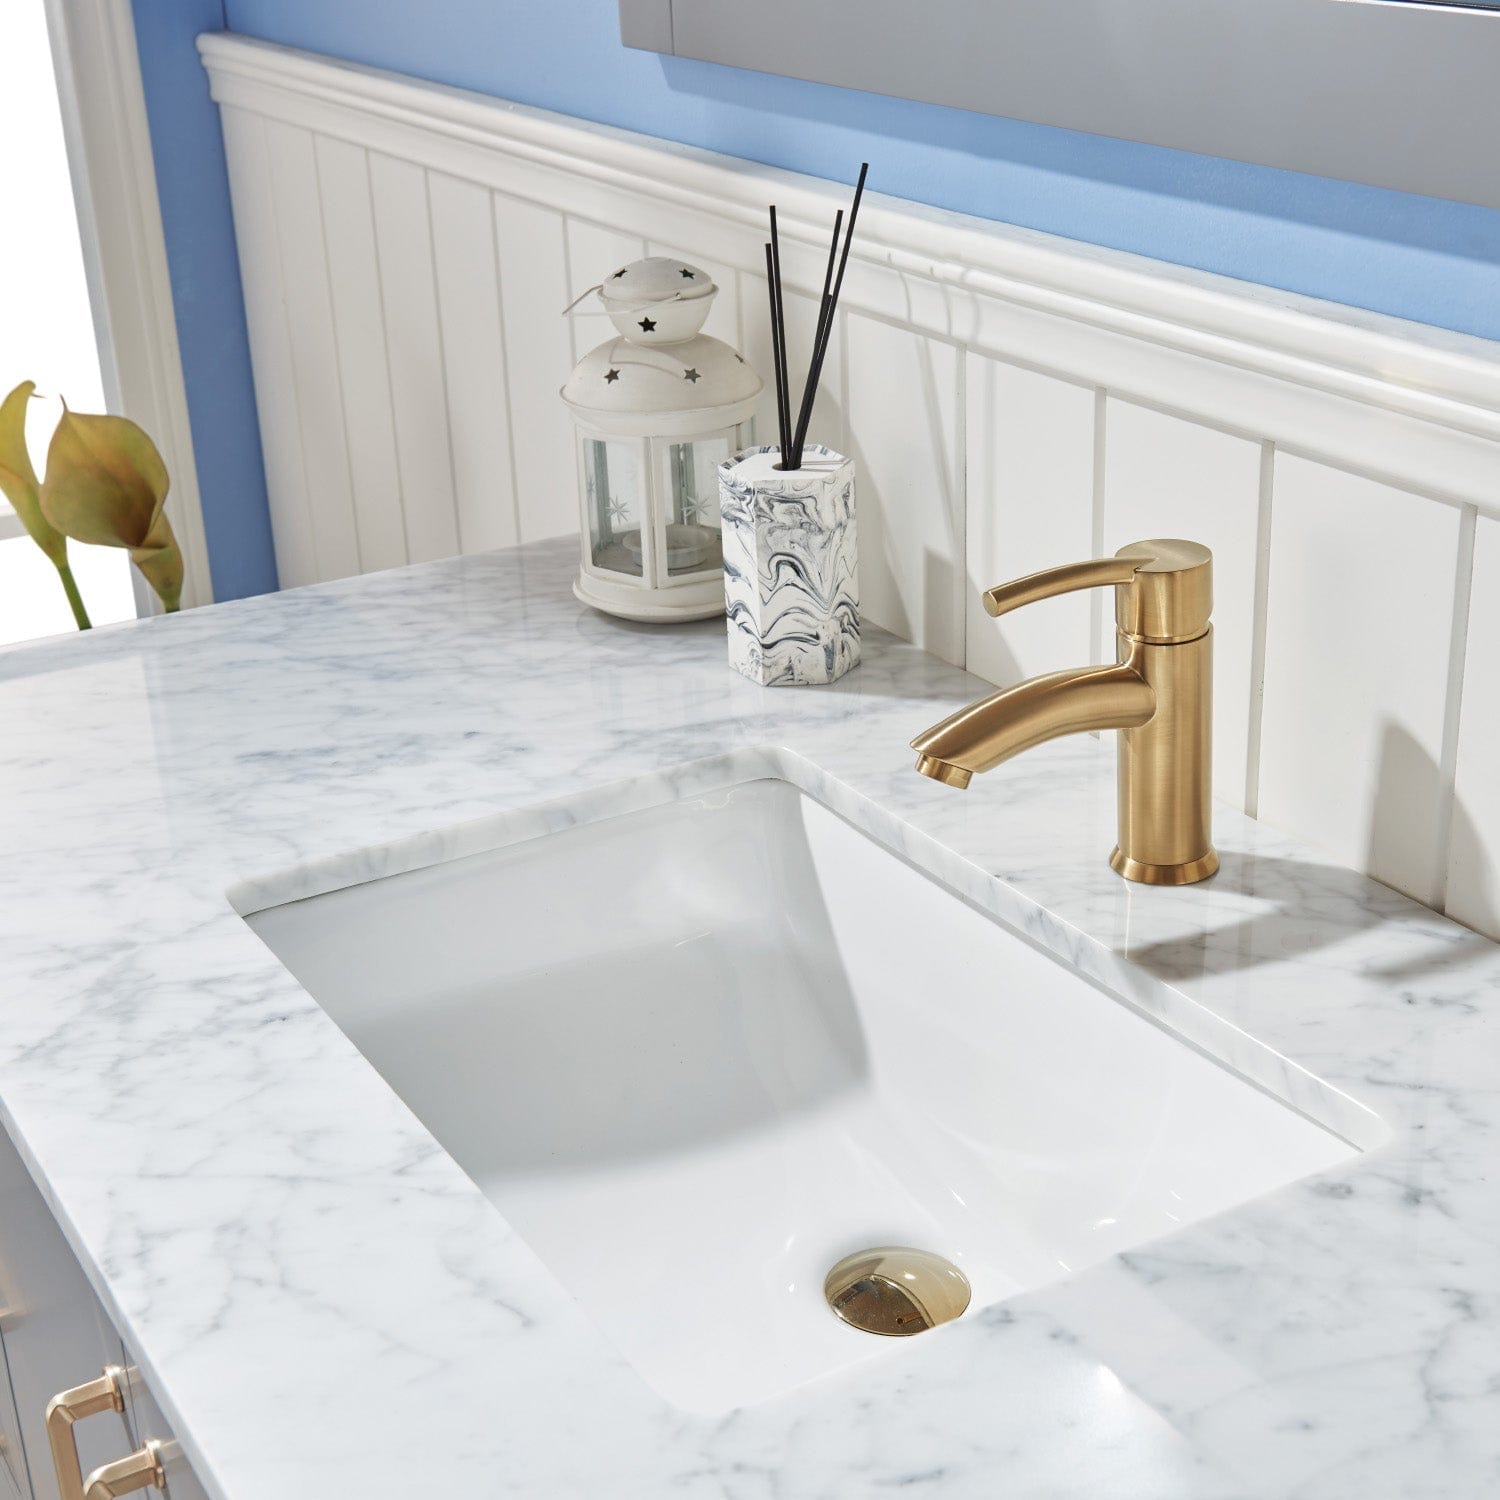 Altair Sutton 48" Single Bathroom Vanity Set in Gray and Carrara White Marble Countertop without Mirror 541048-GR-CA-NM - Molaix631112971881Vanity541048-GR-CA-NM